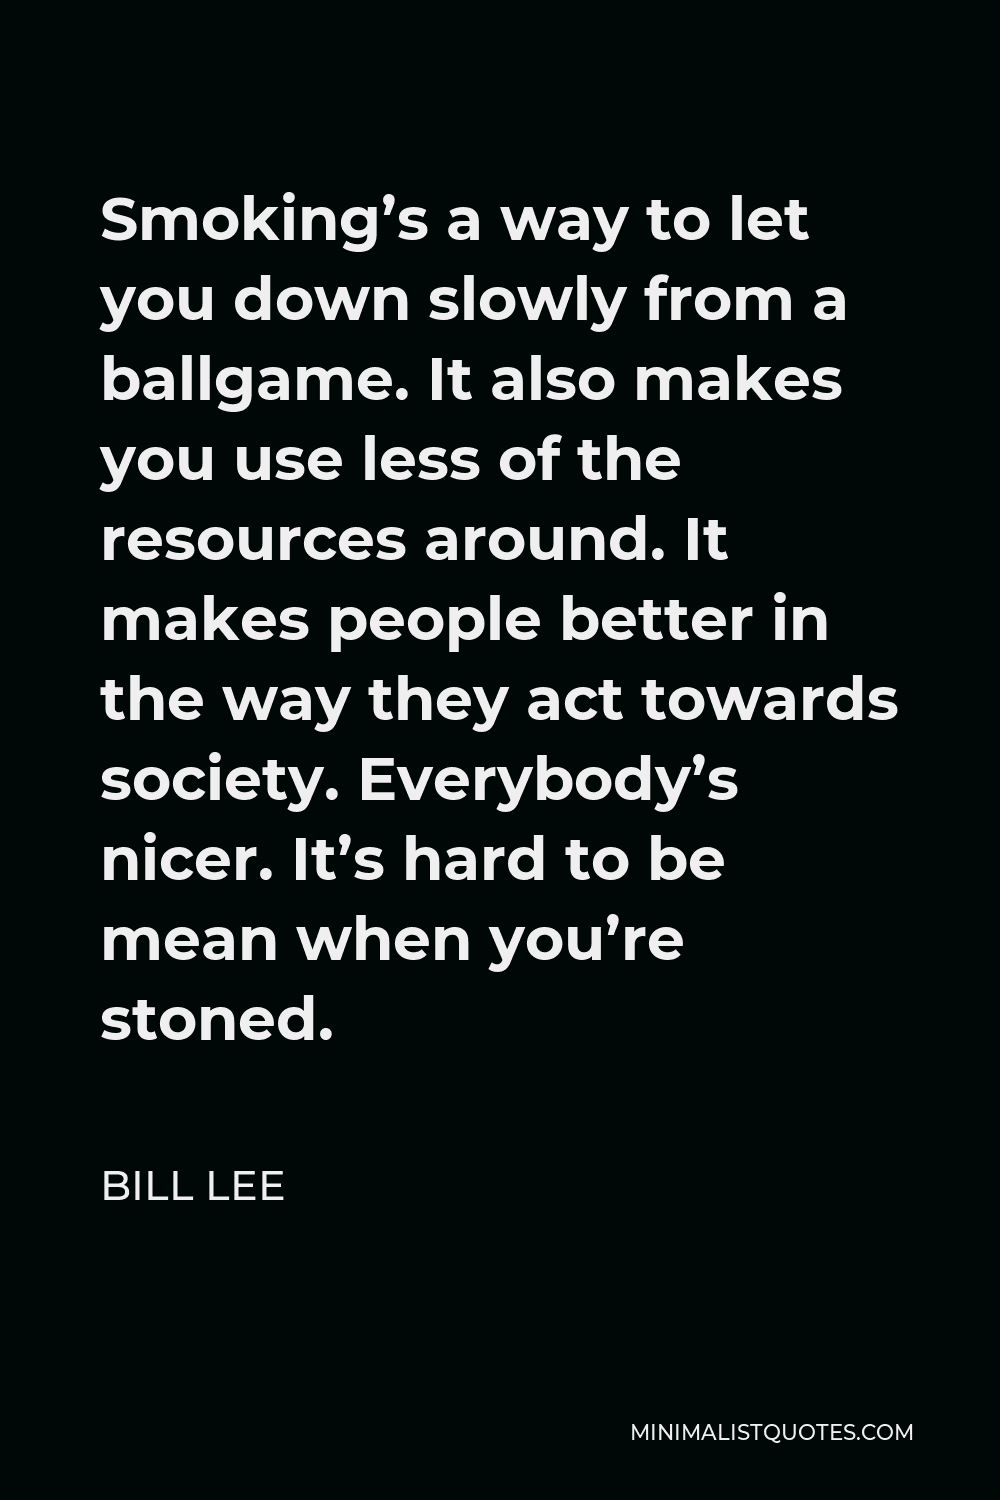 Bill Lee Quote - Smoking’s a way to let you down slowly from a ballgame. It also makes you use less of the resources around. It makes people better in the way they act towards society. Everybody’s nicer. It’s hard to be mean when you’re stoned.